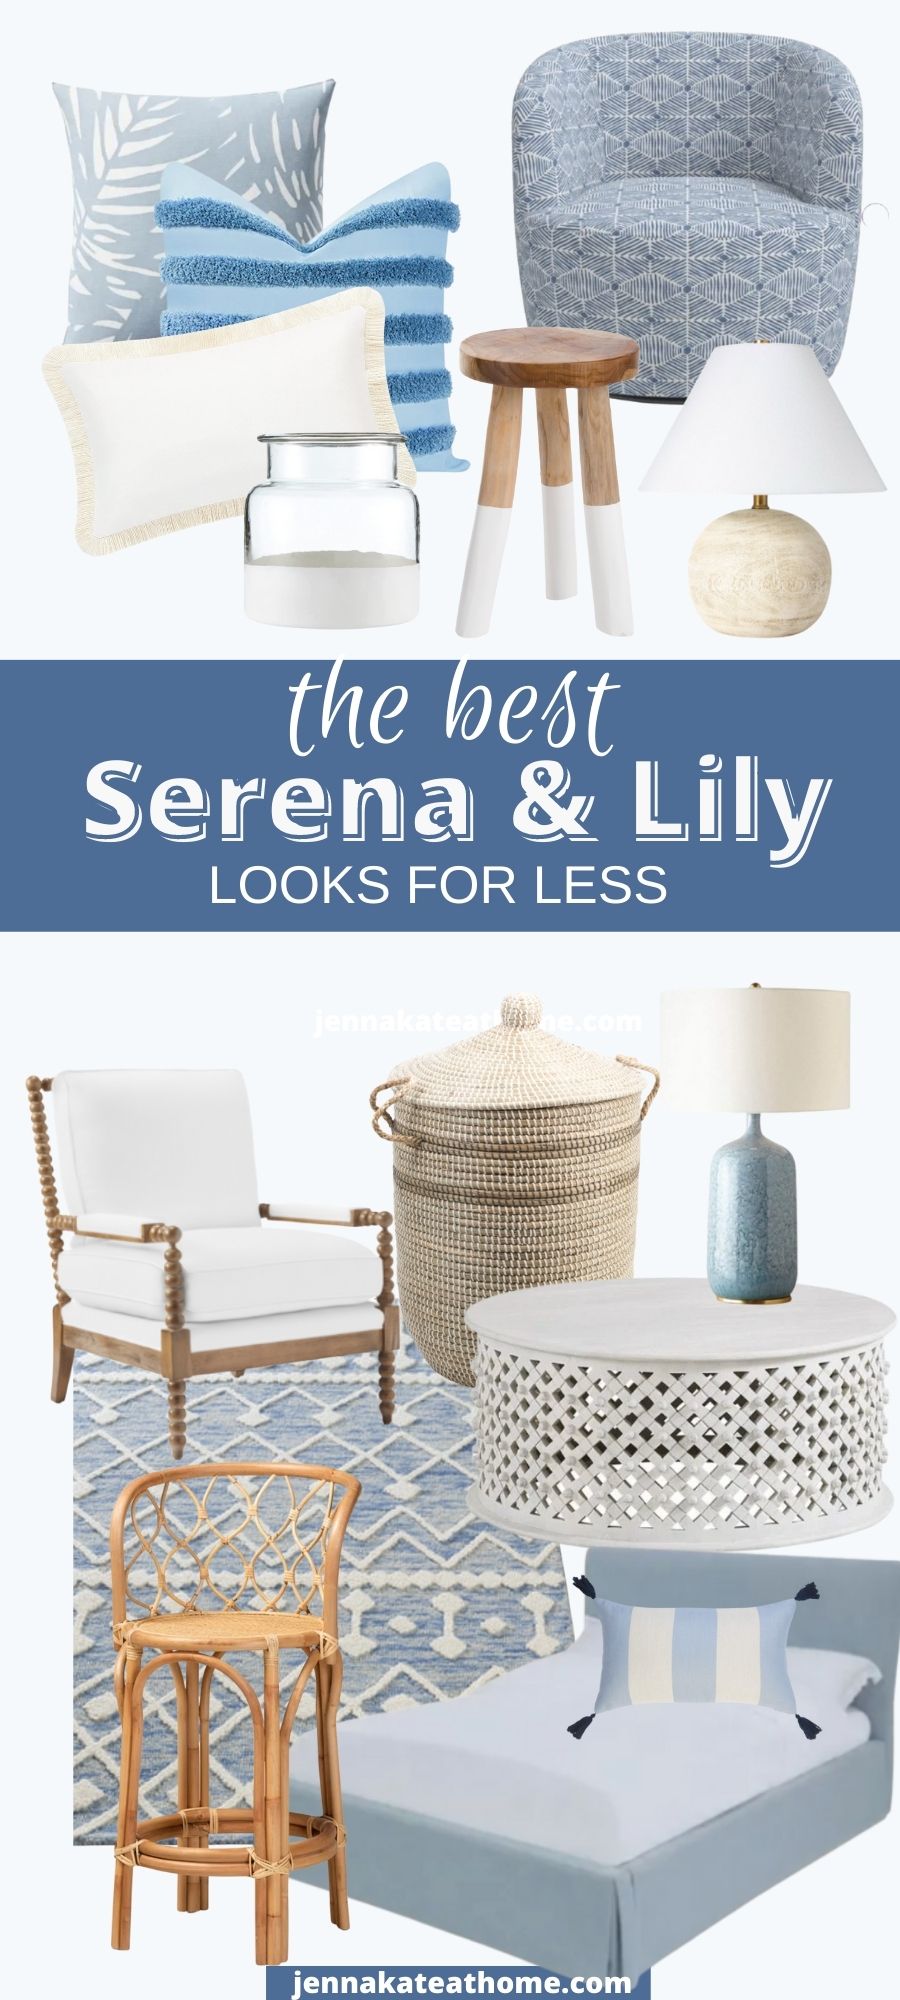 Serena & Lily Looks For Less